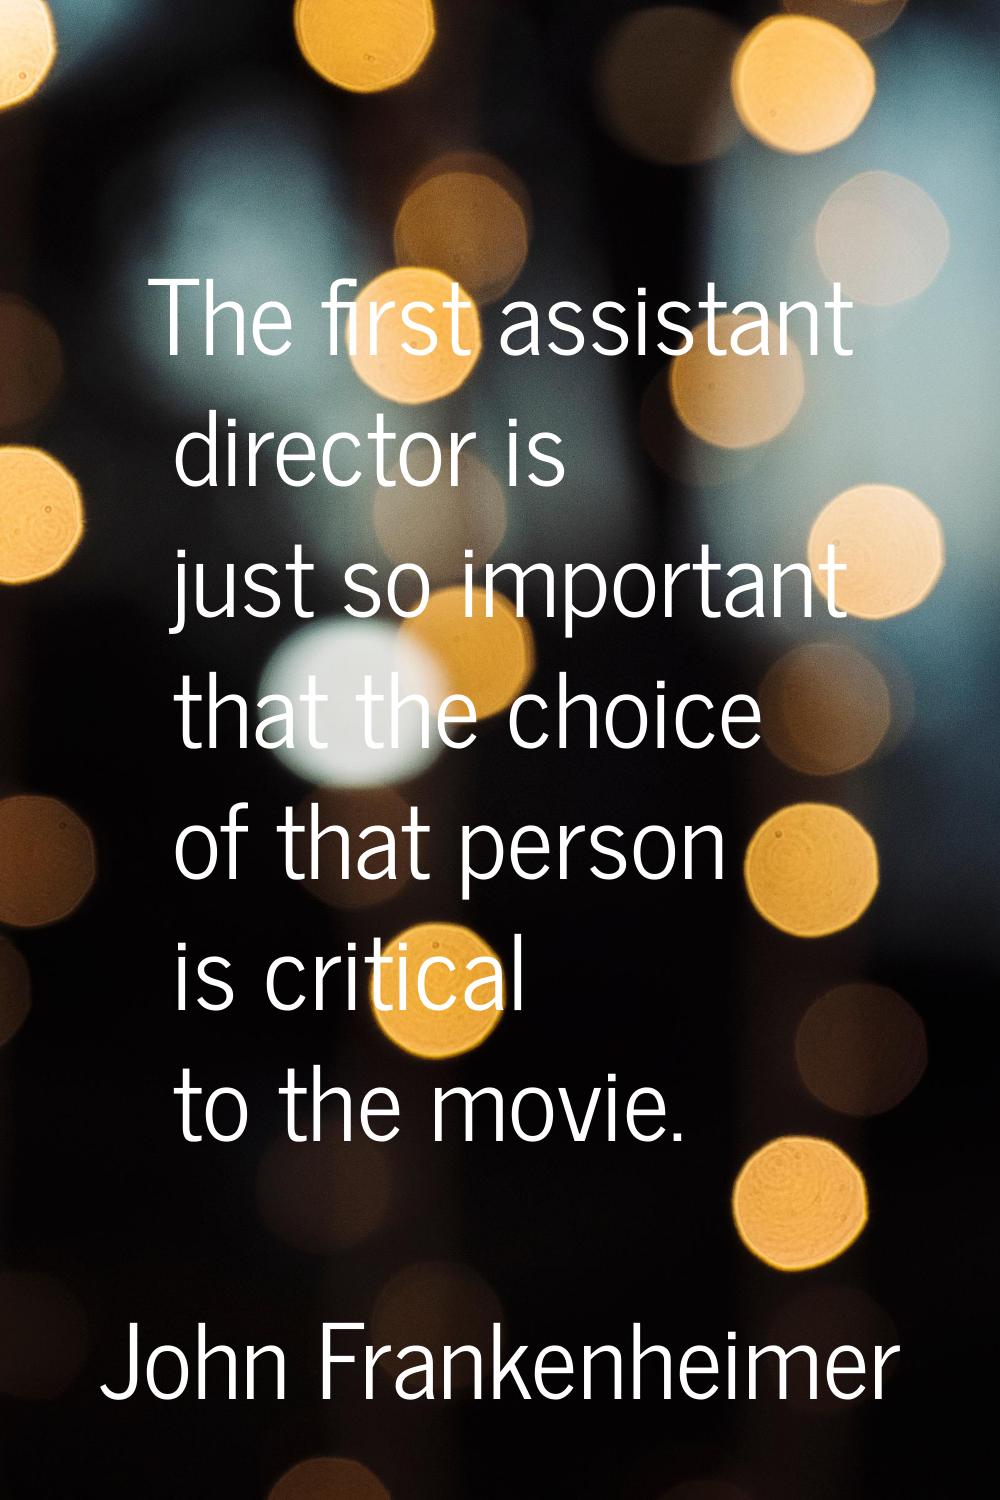 The first assistant director is just so important that the choice of that person is critical to the